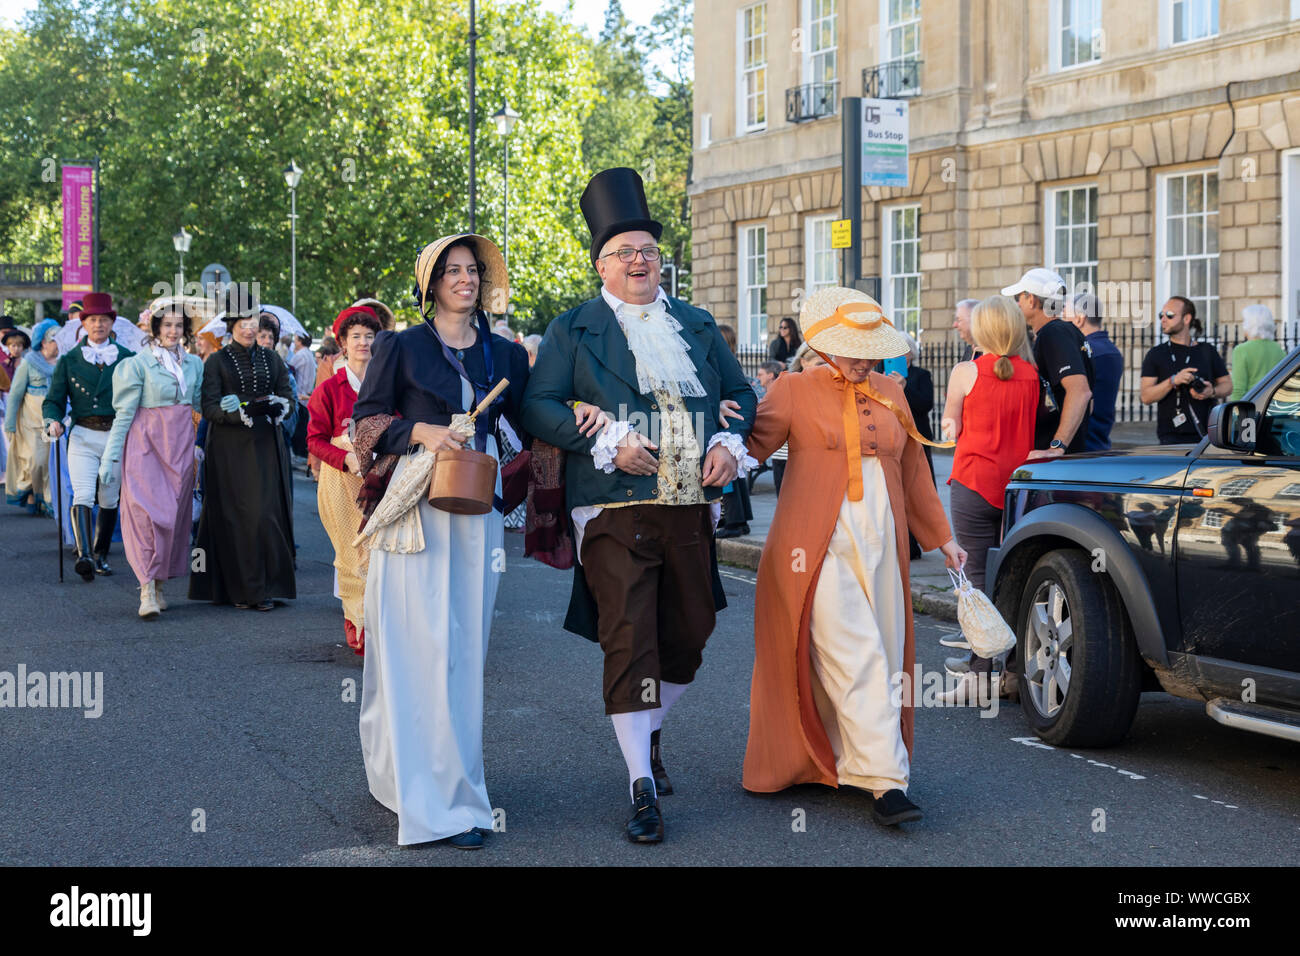 Jane Austen Festival 2019.  The Grand Regency Costumed Promenade where 500+ people from around the world join the official opening procession of the Jane Austen festival dressed in period costume. Bath, England, UK Stock Photo